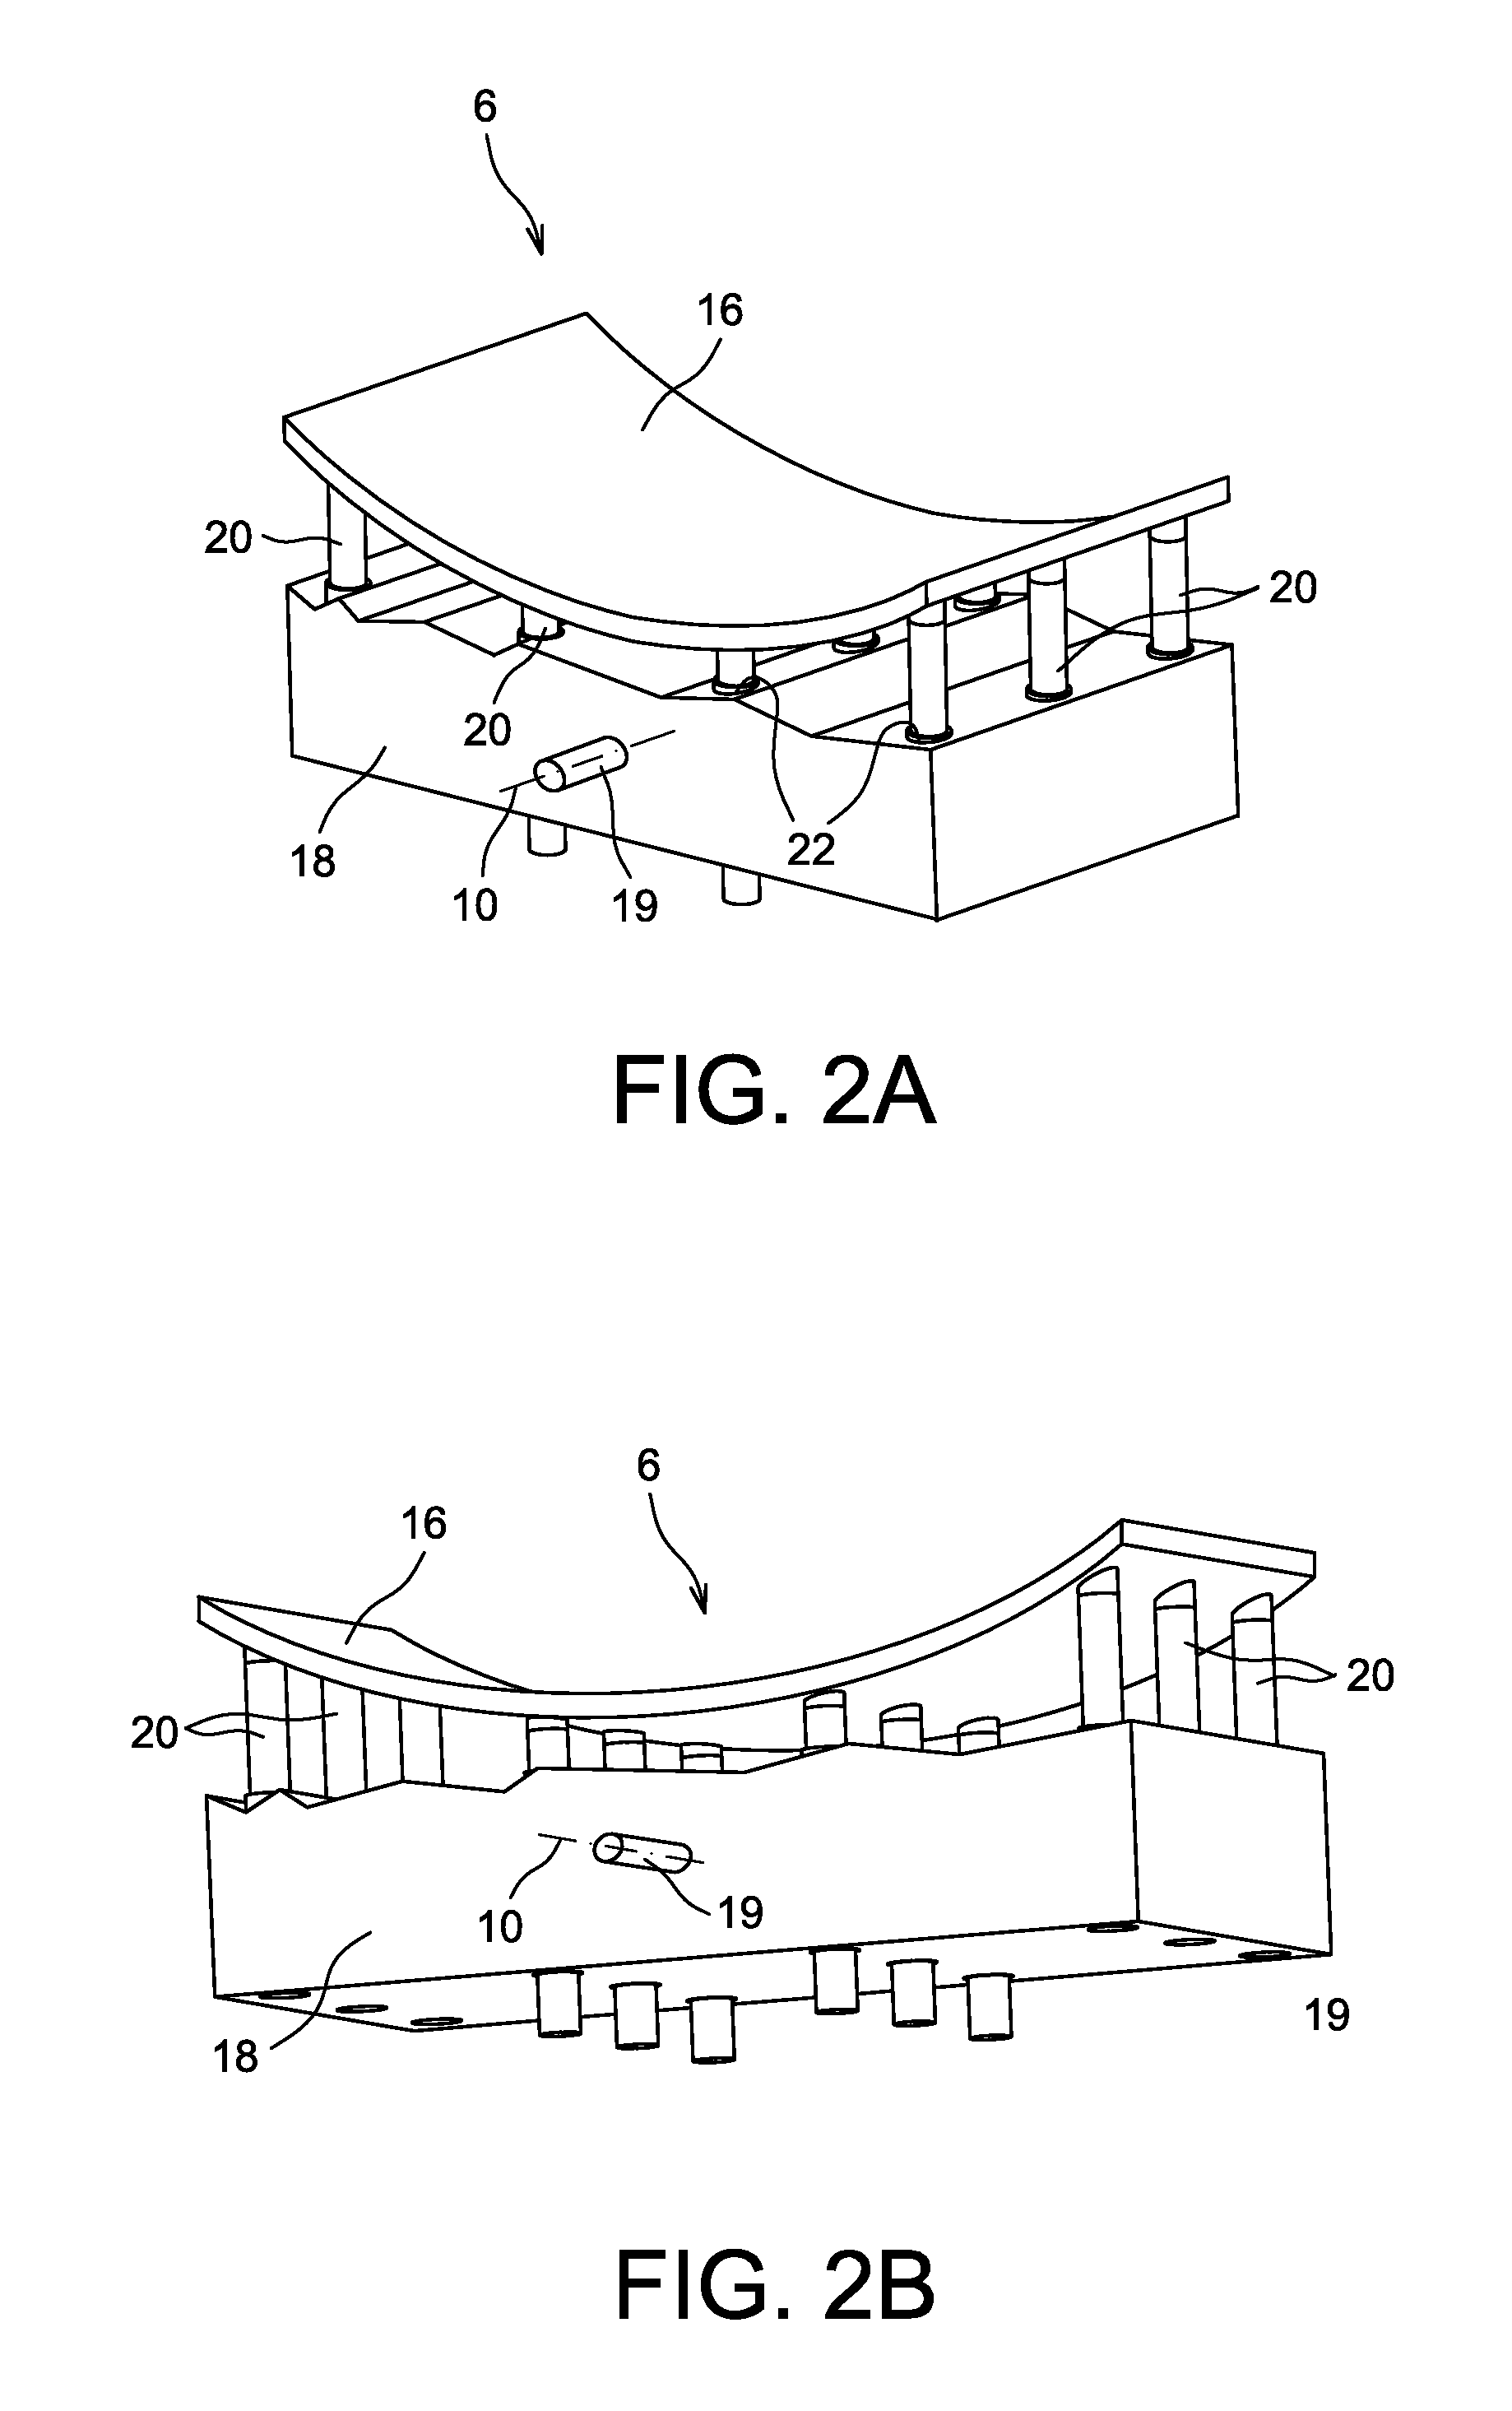 Method for Manufacturing a Reflector, Preferably for the Solar Energy Field